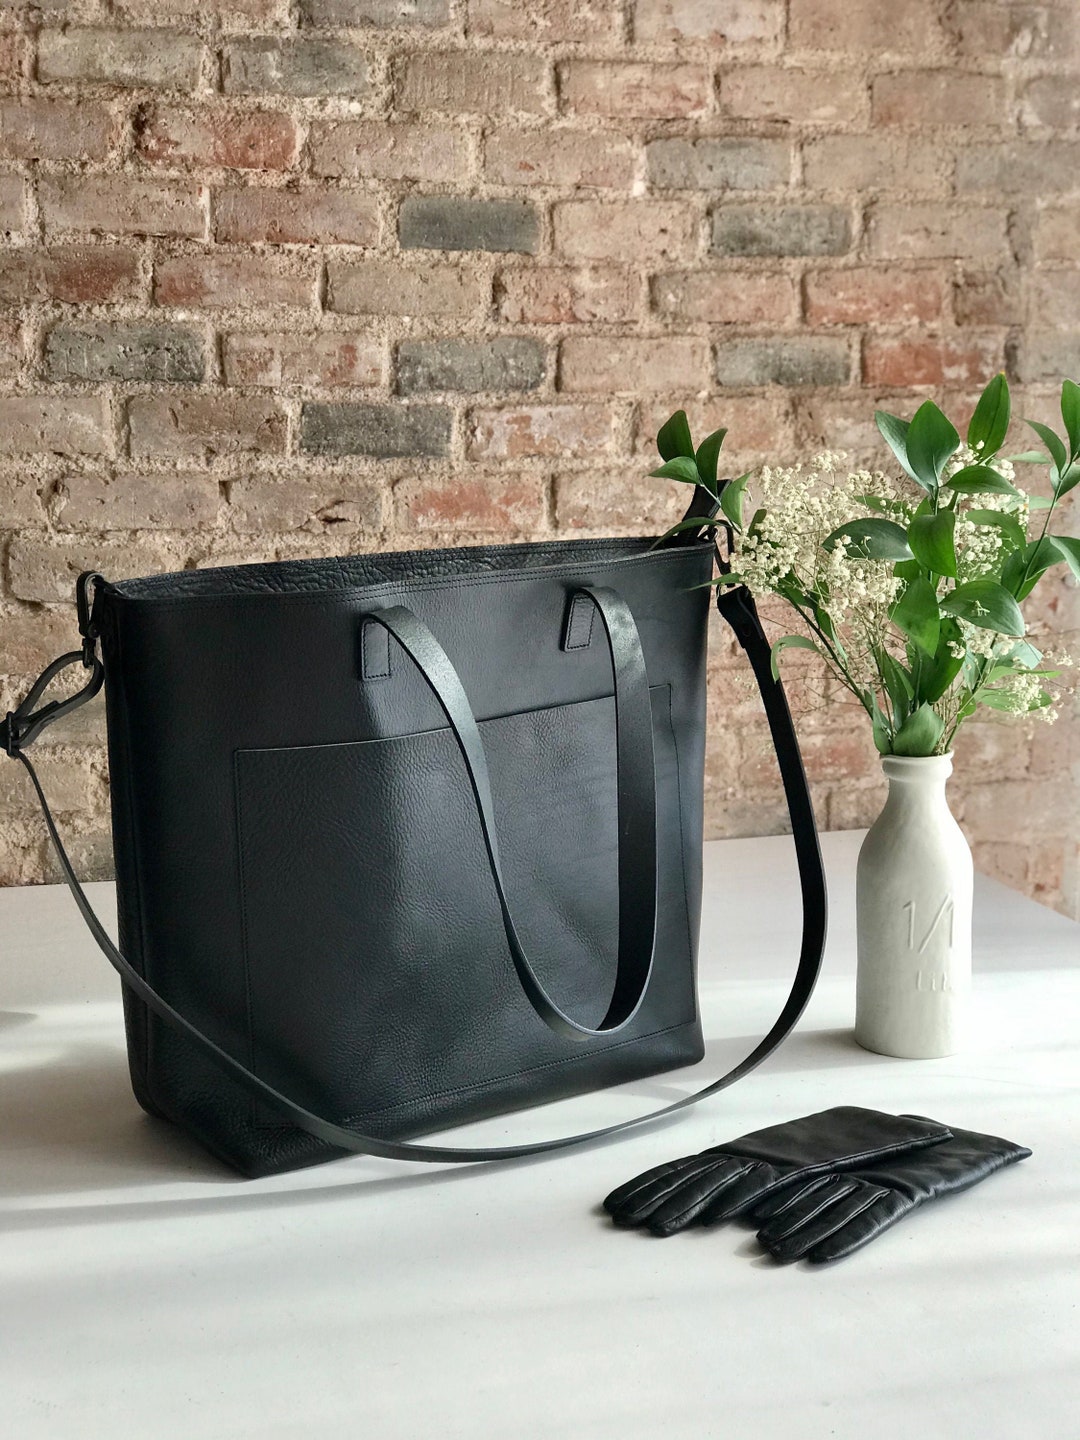 Oversized Black Leather Tote Bag With Outside Pockets. Cap Sa - Etsy